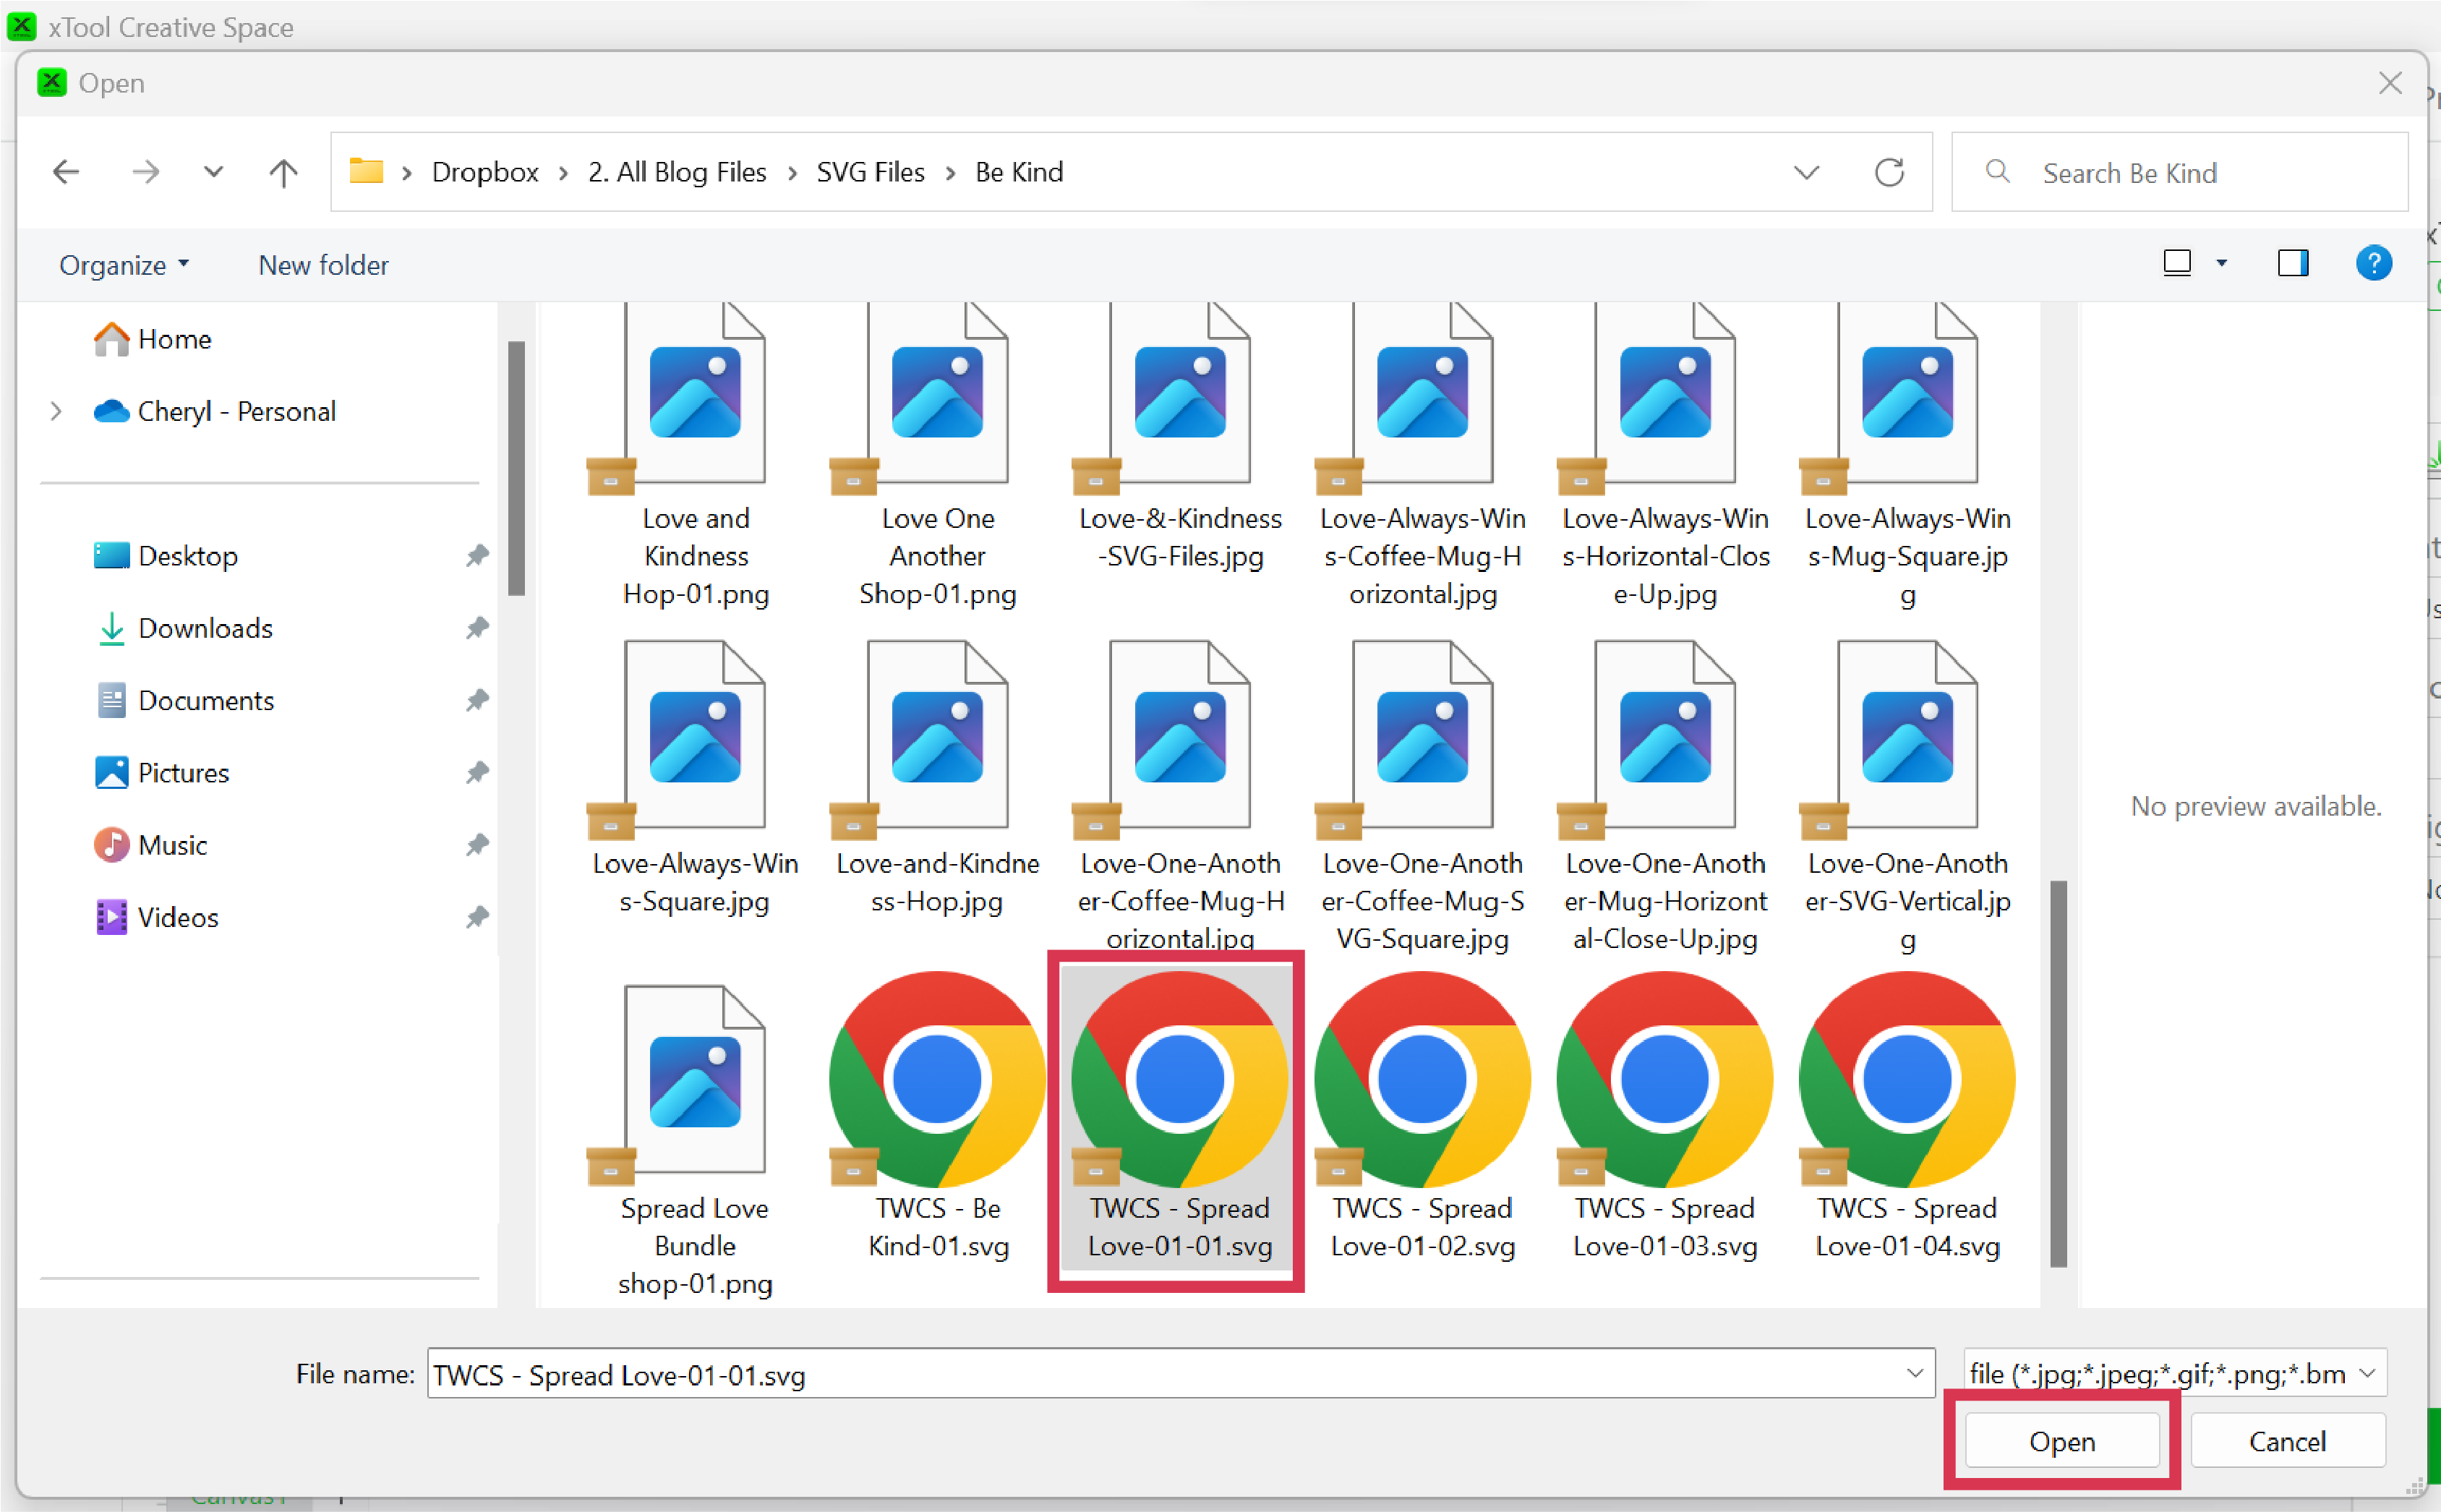 Screenshot of explorer window showing files and then open button